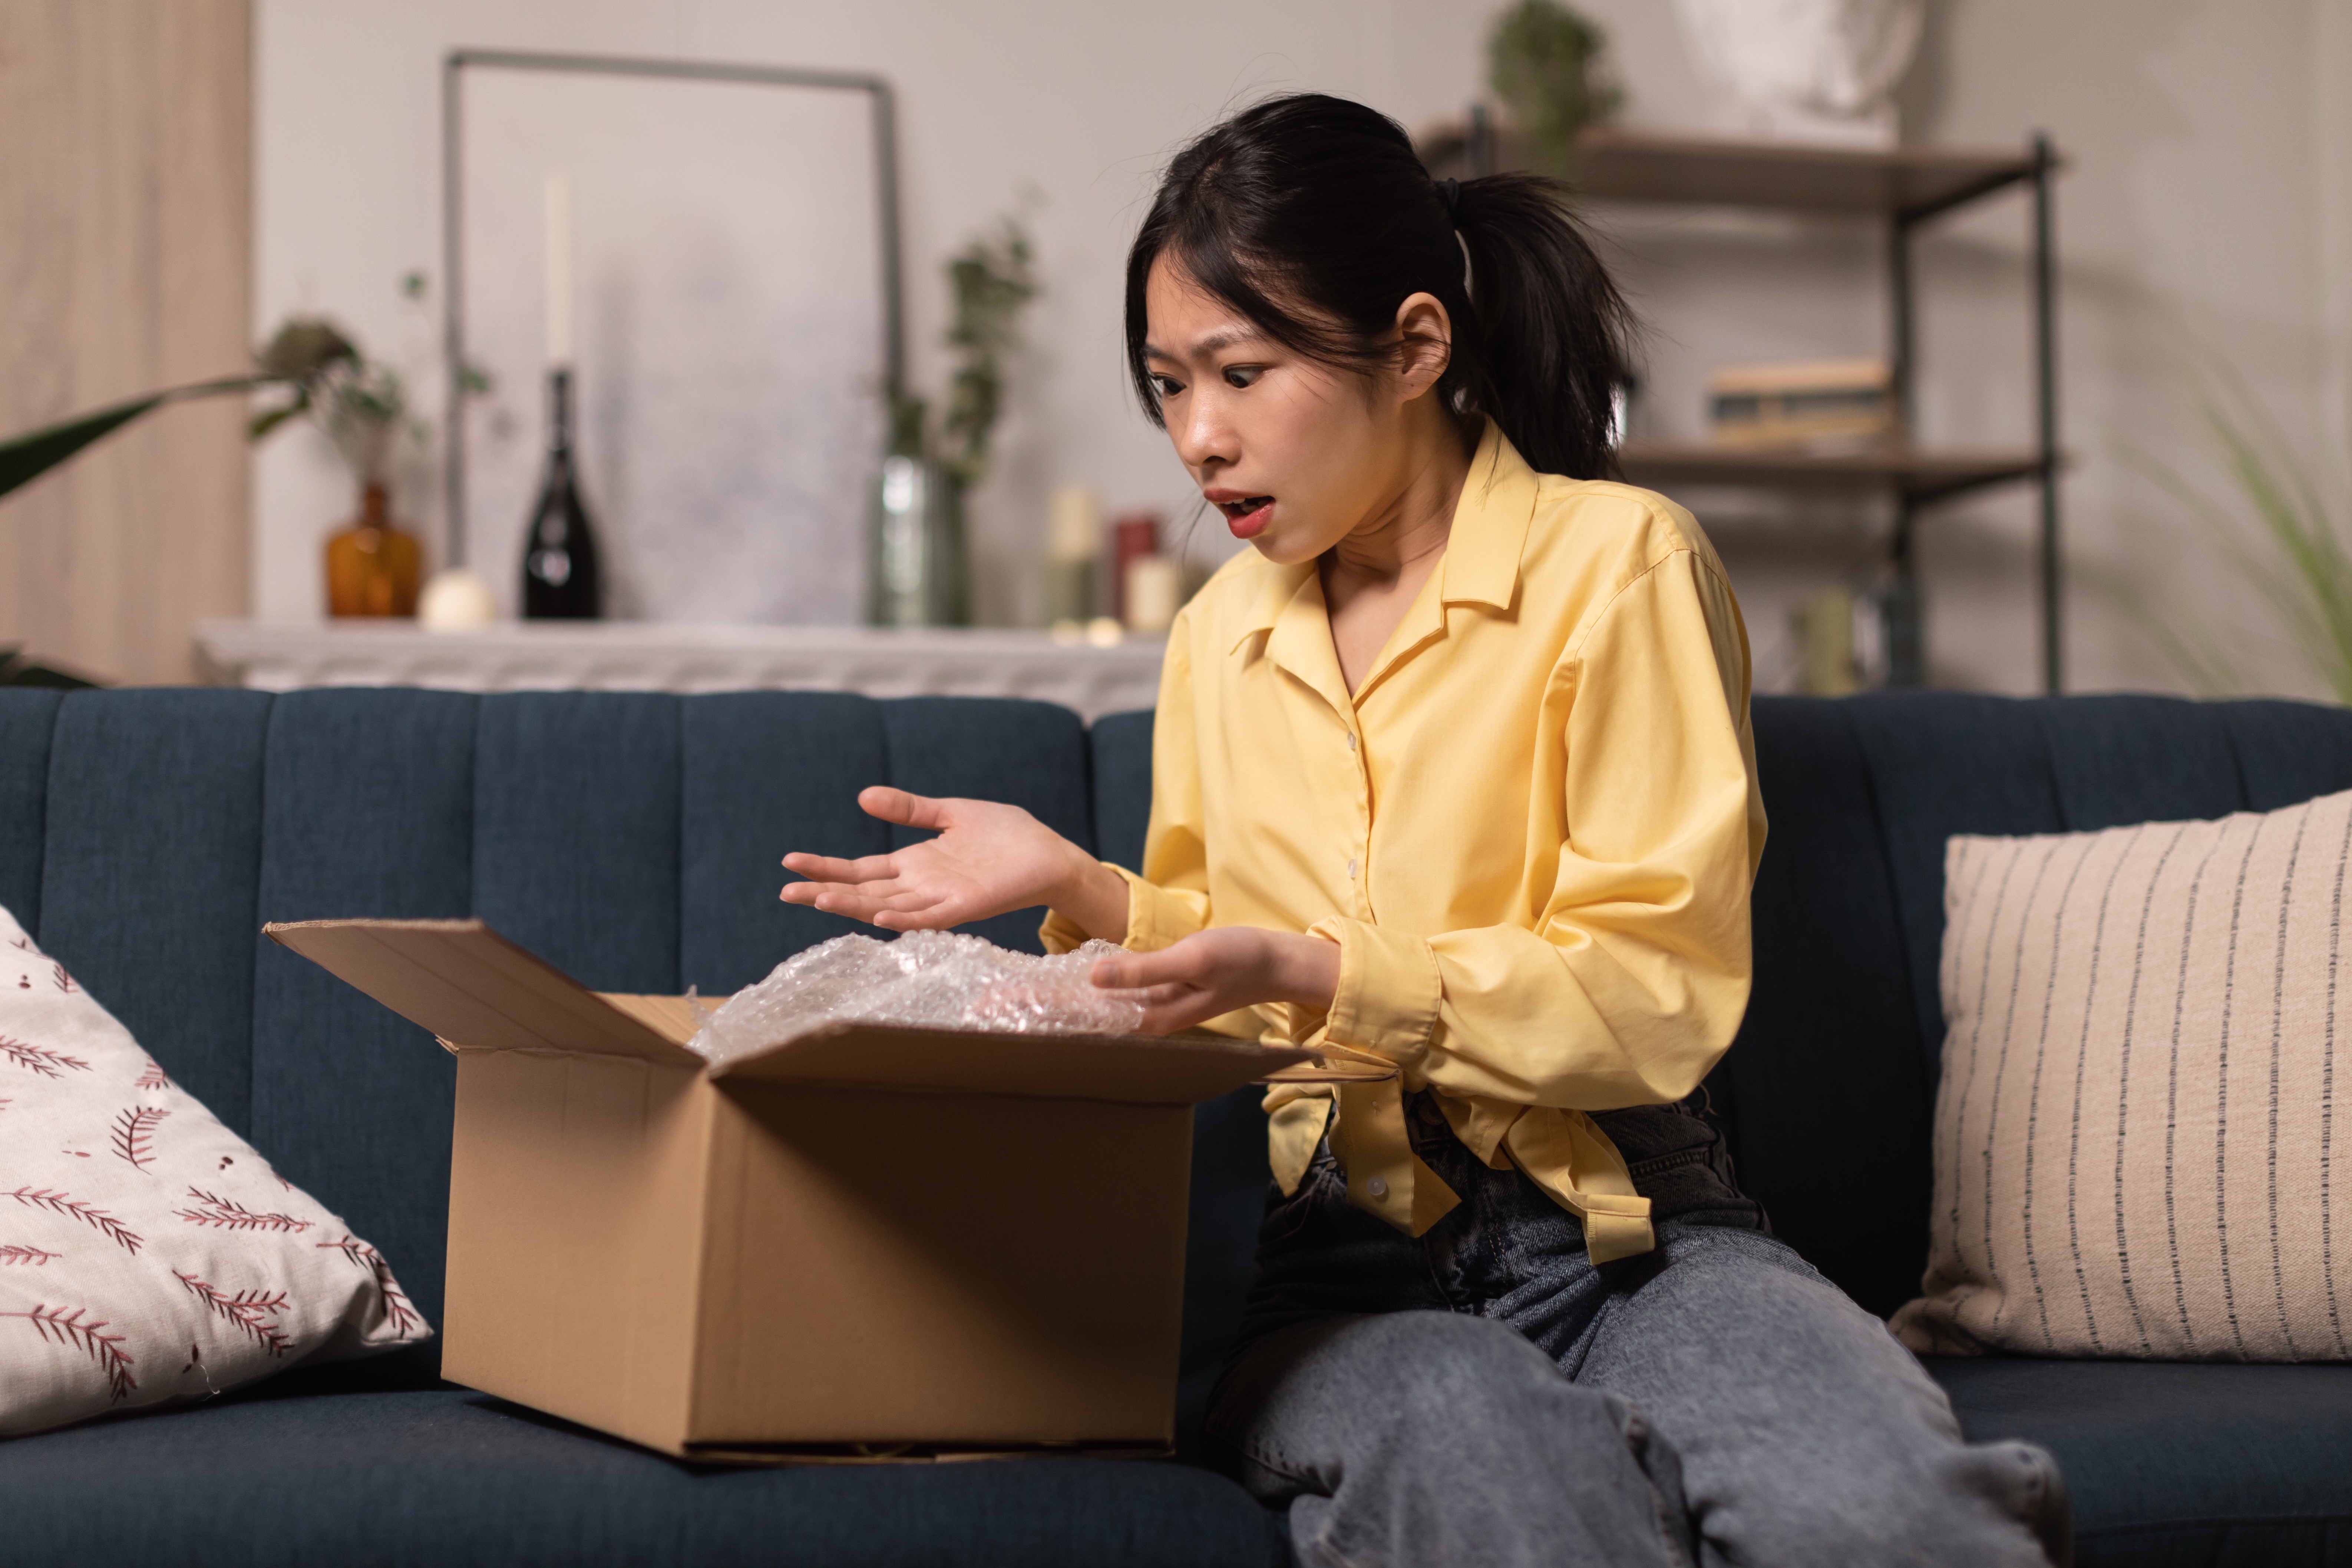 Woman sitting on the couch upset looking at an empty box